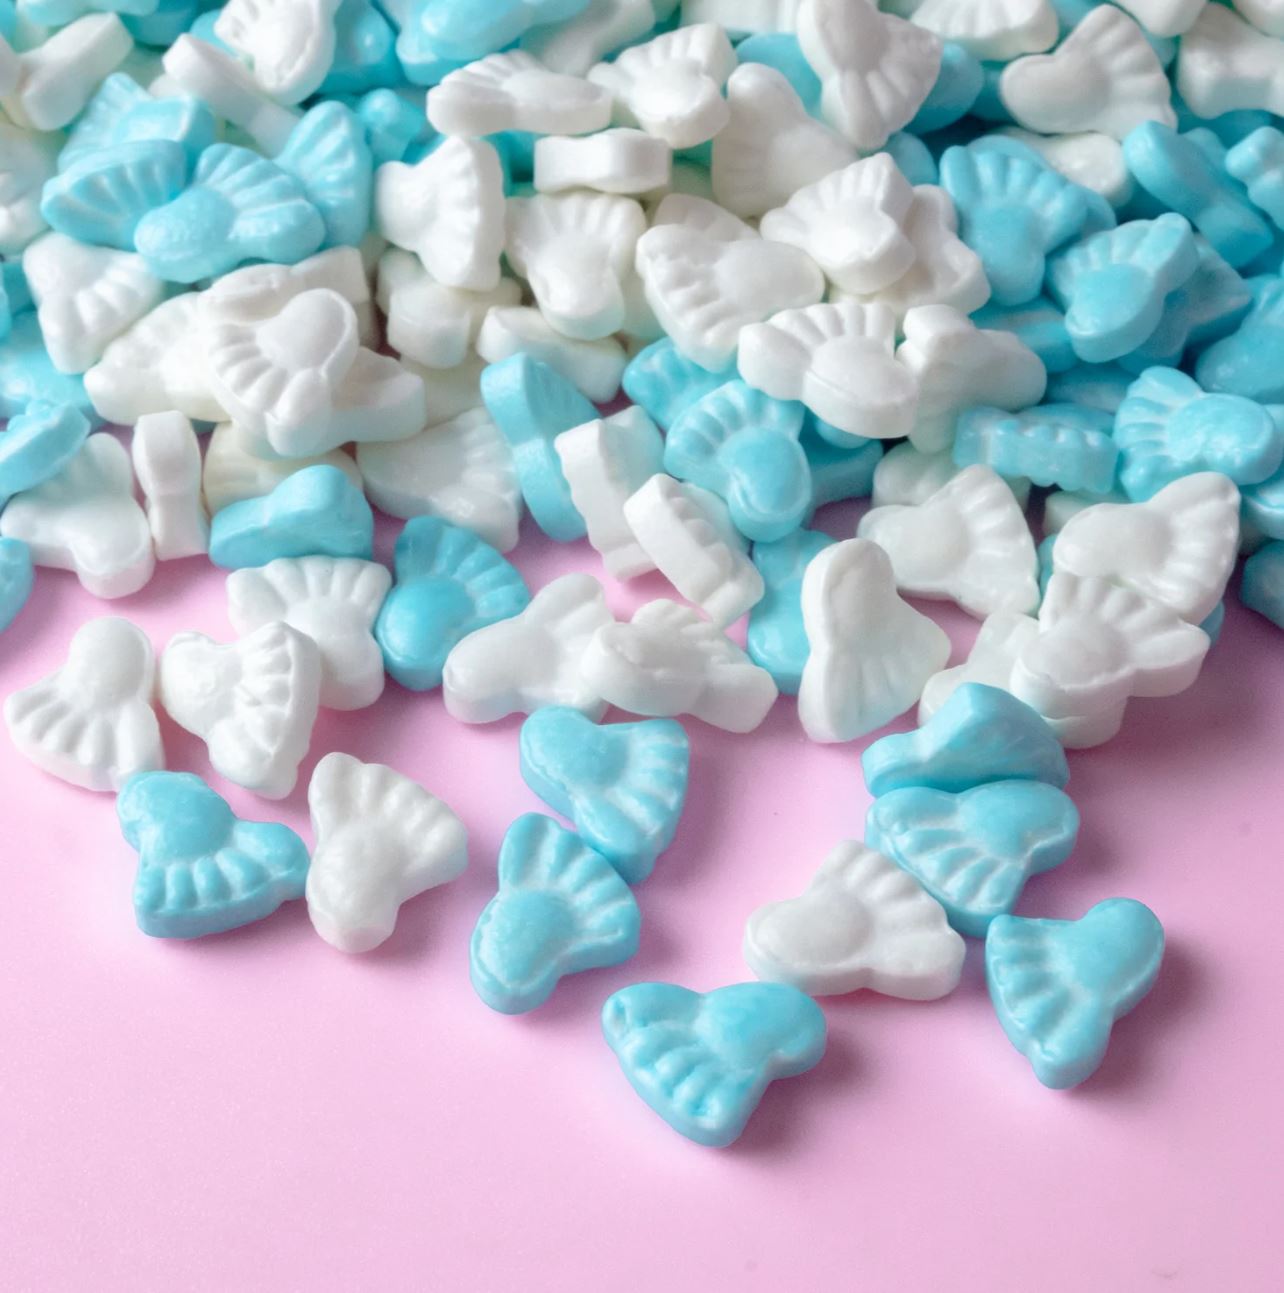 Blue Baby Feet Candy Topping